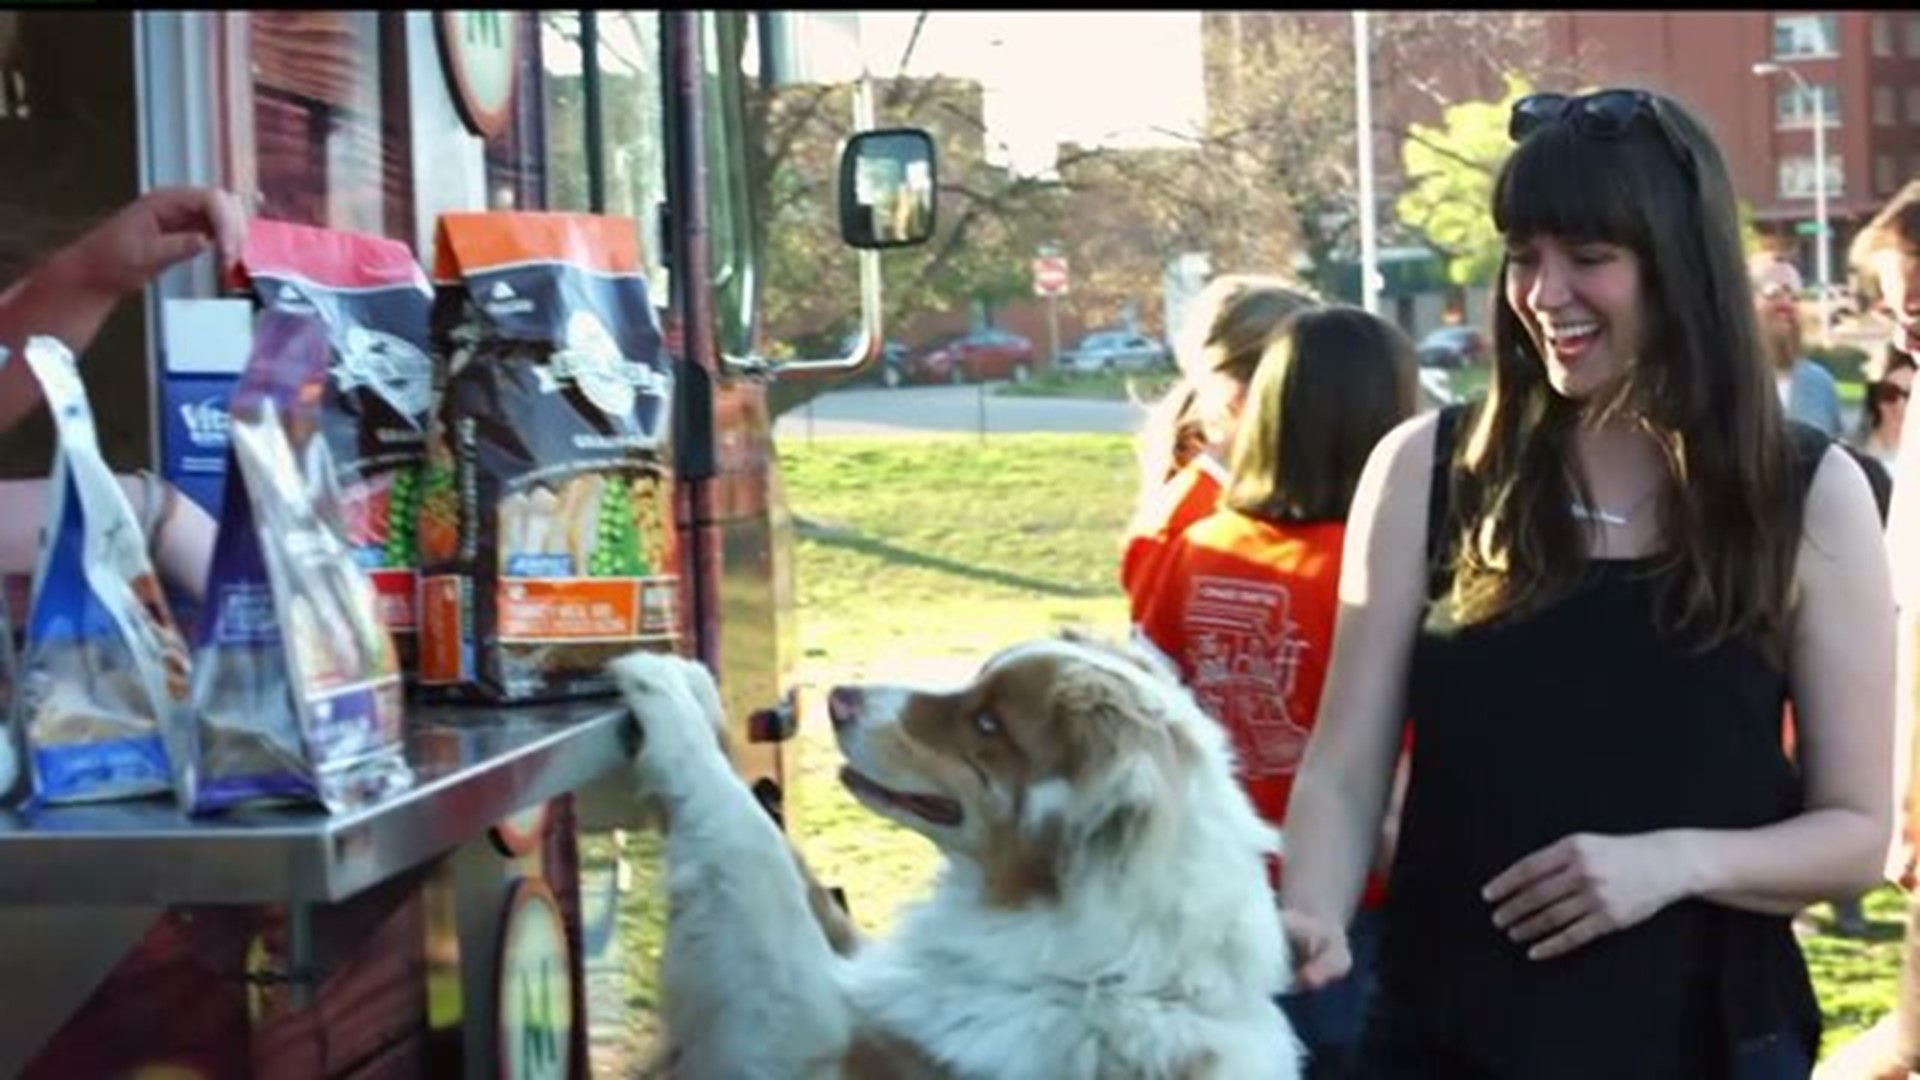 The Good Stuff Pet Truck hits the road to educate pet owners